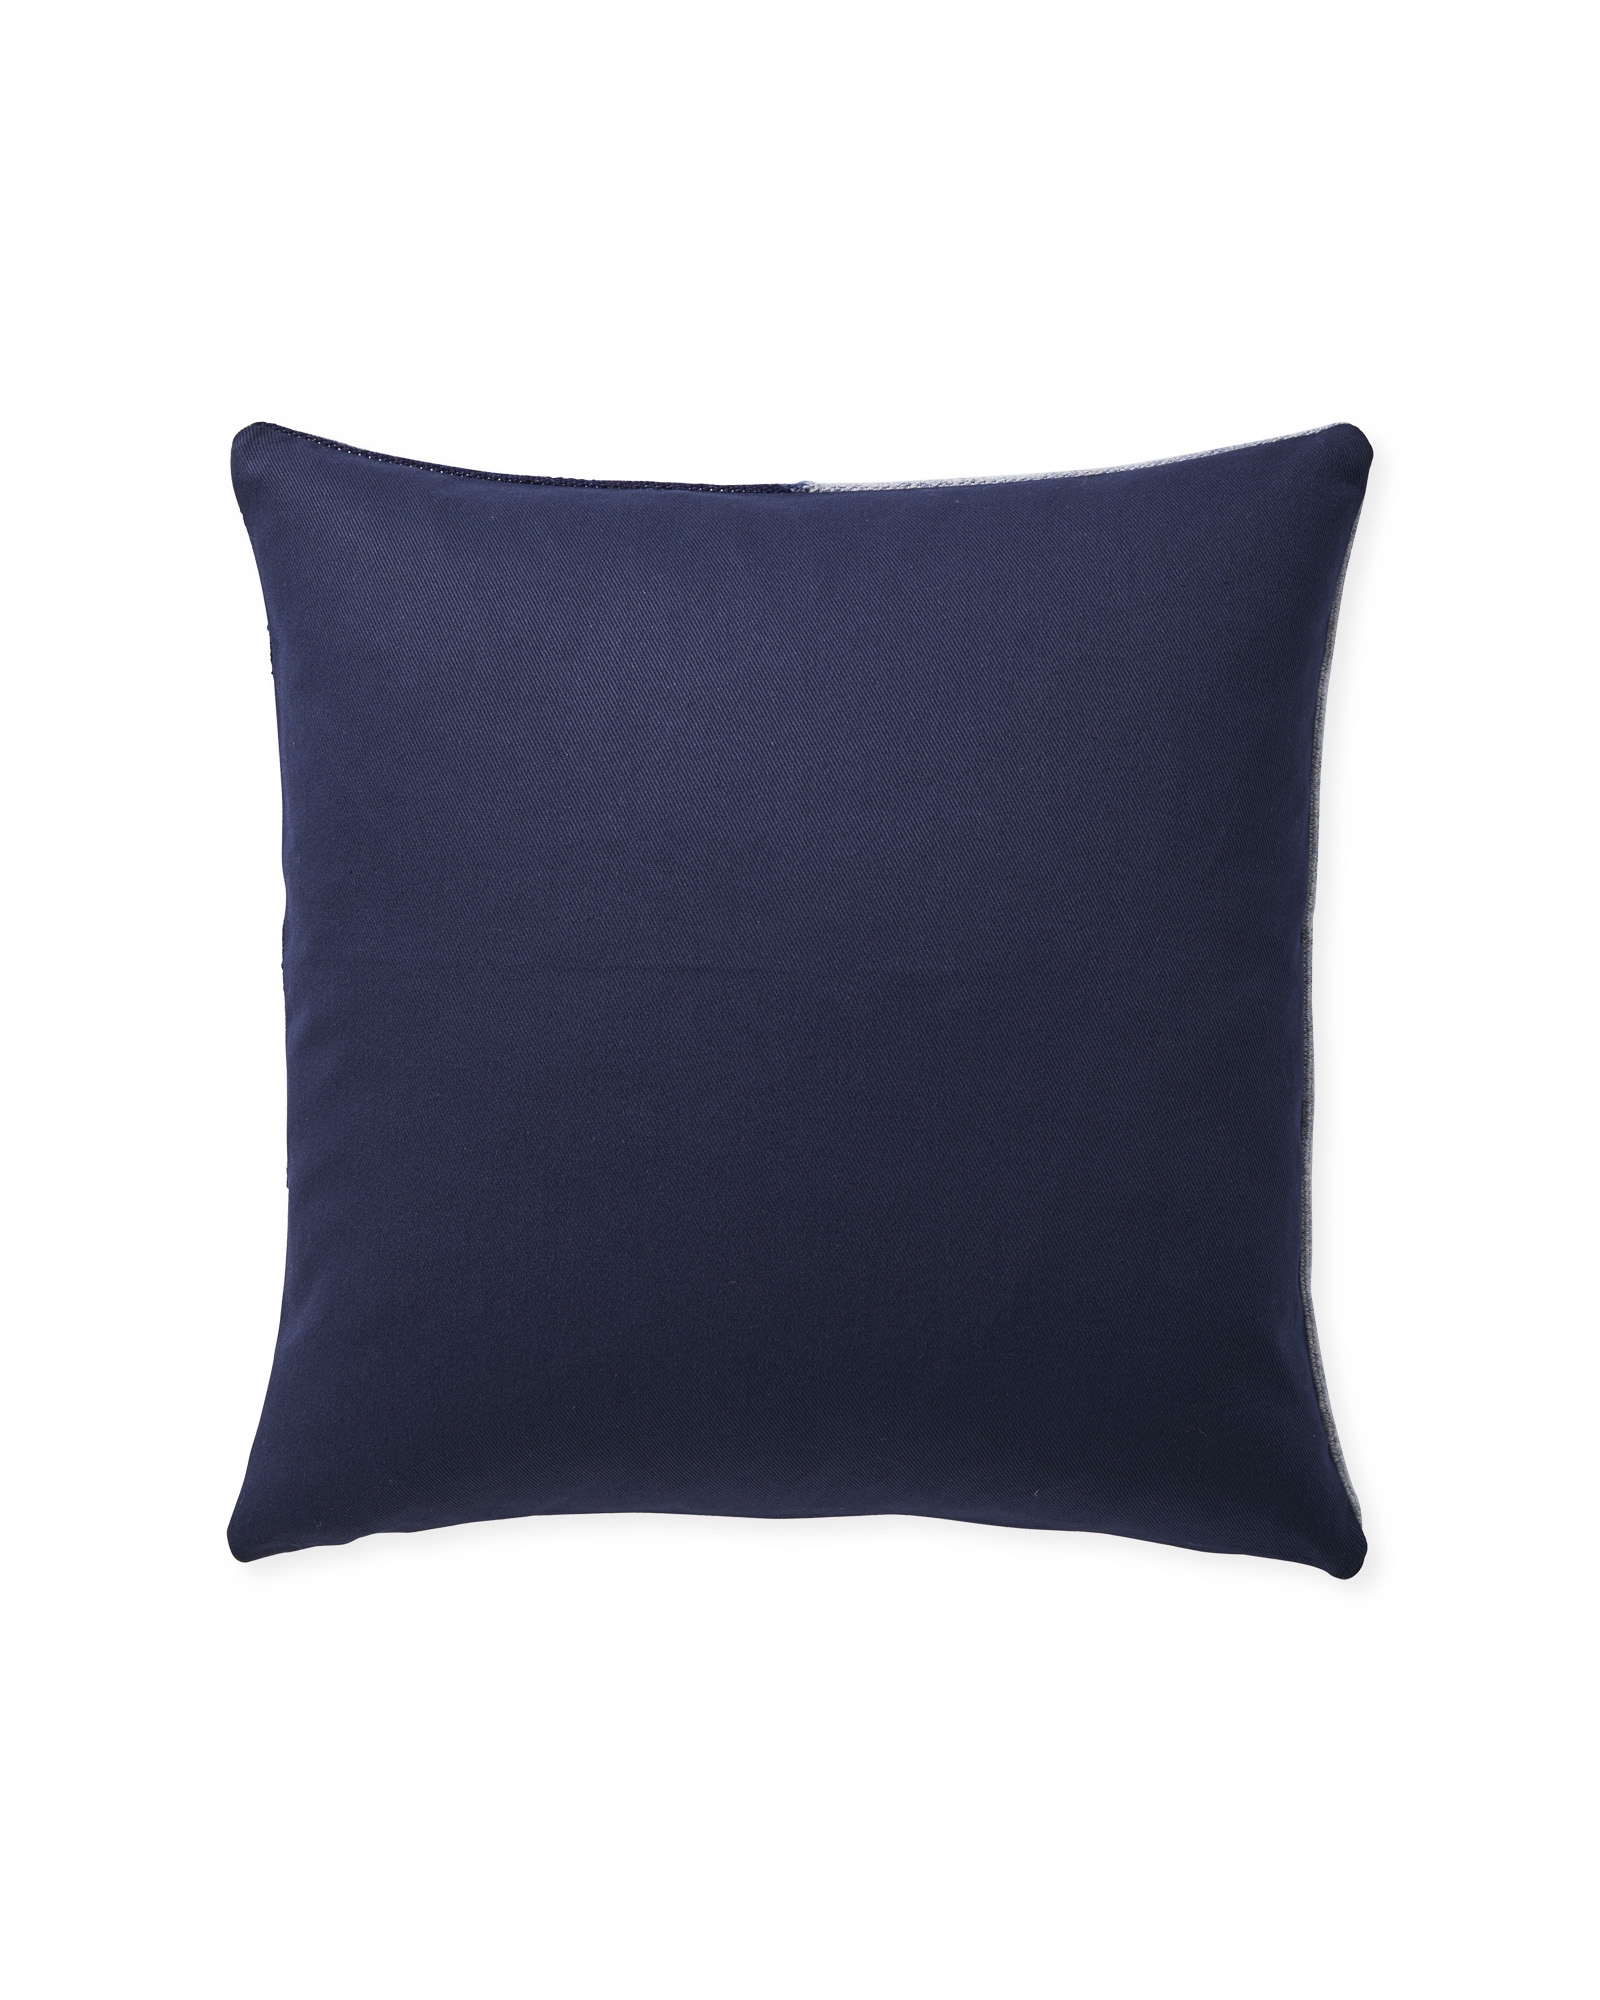 Francis Pillow Cover - Navy - Insert sold separately - Image 1